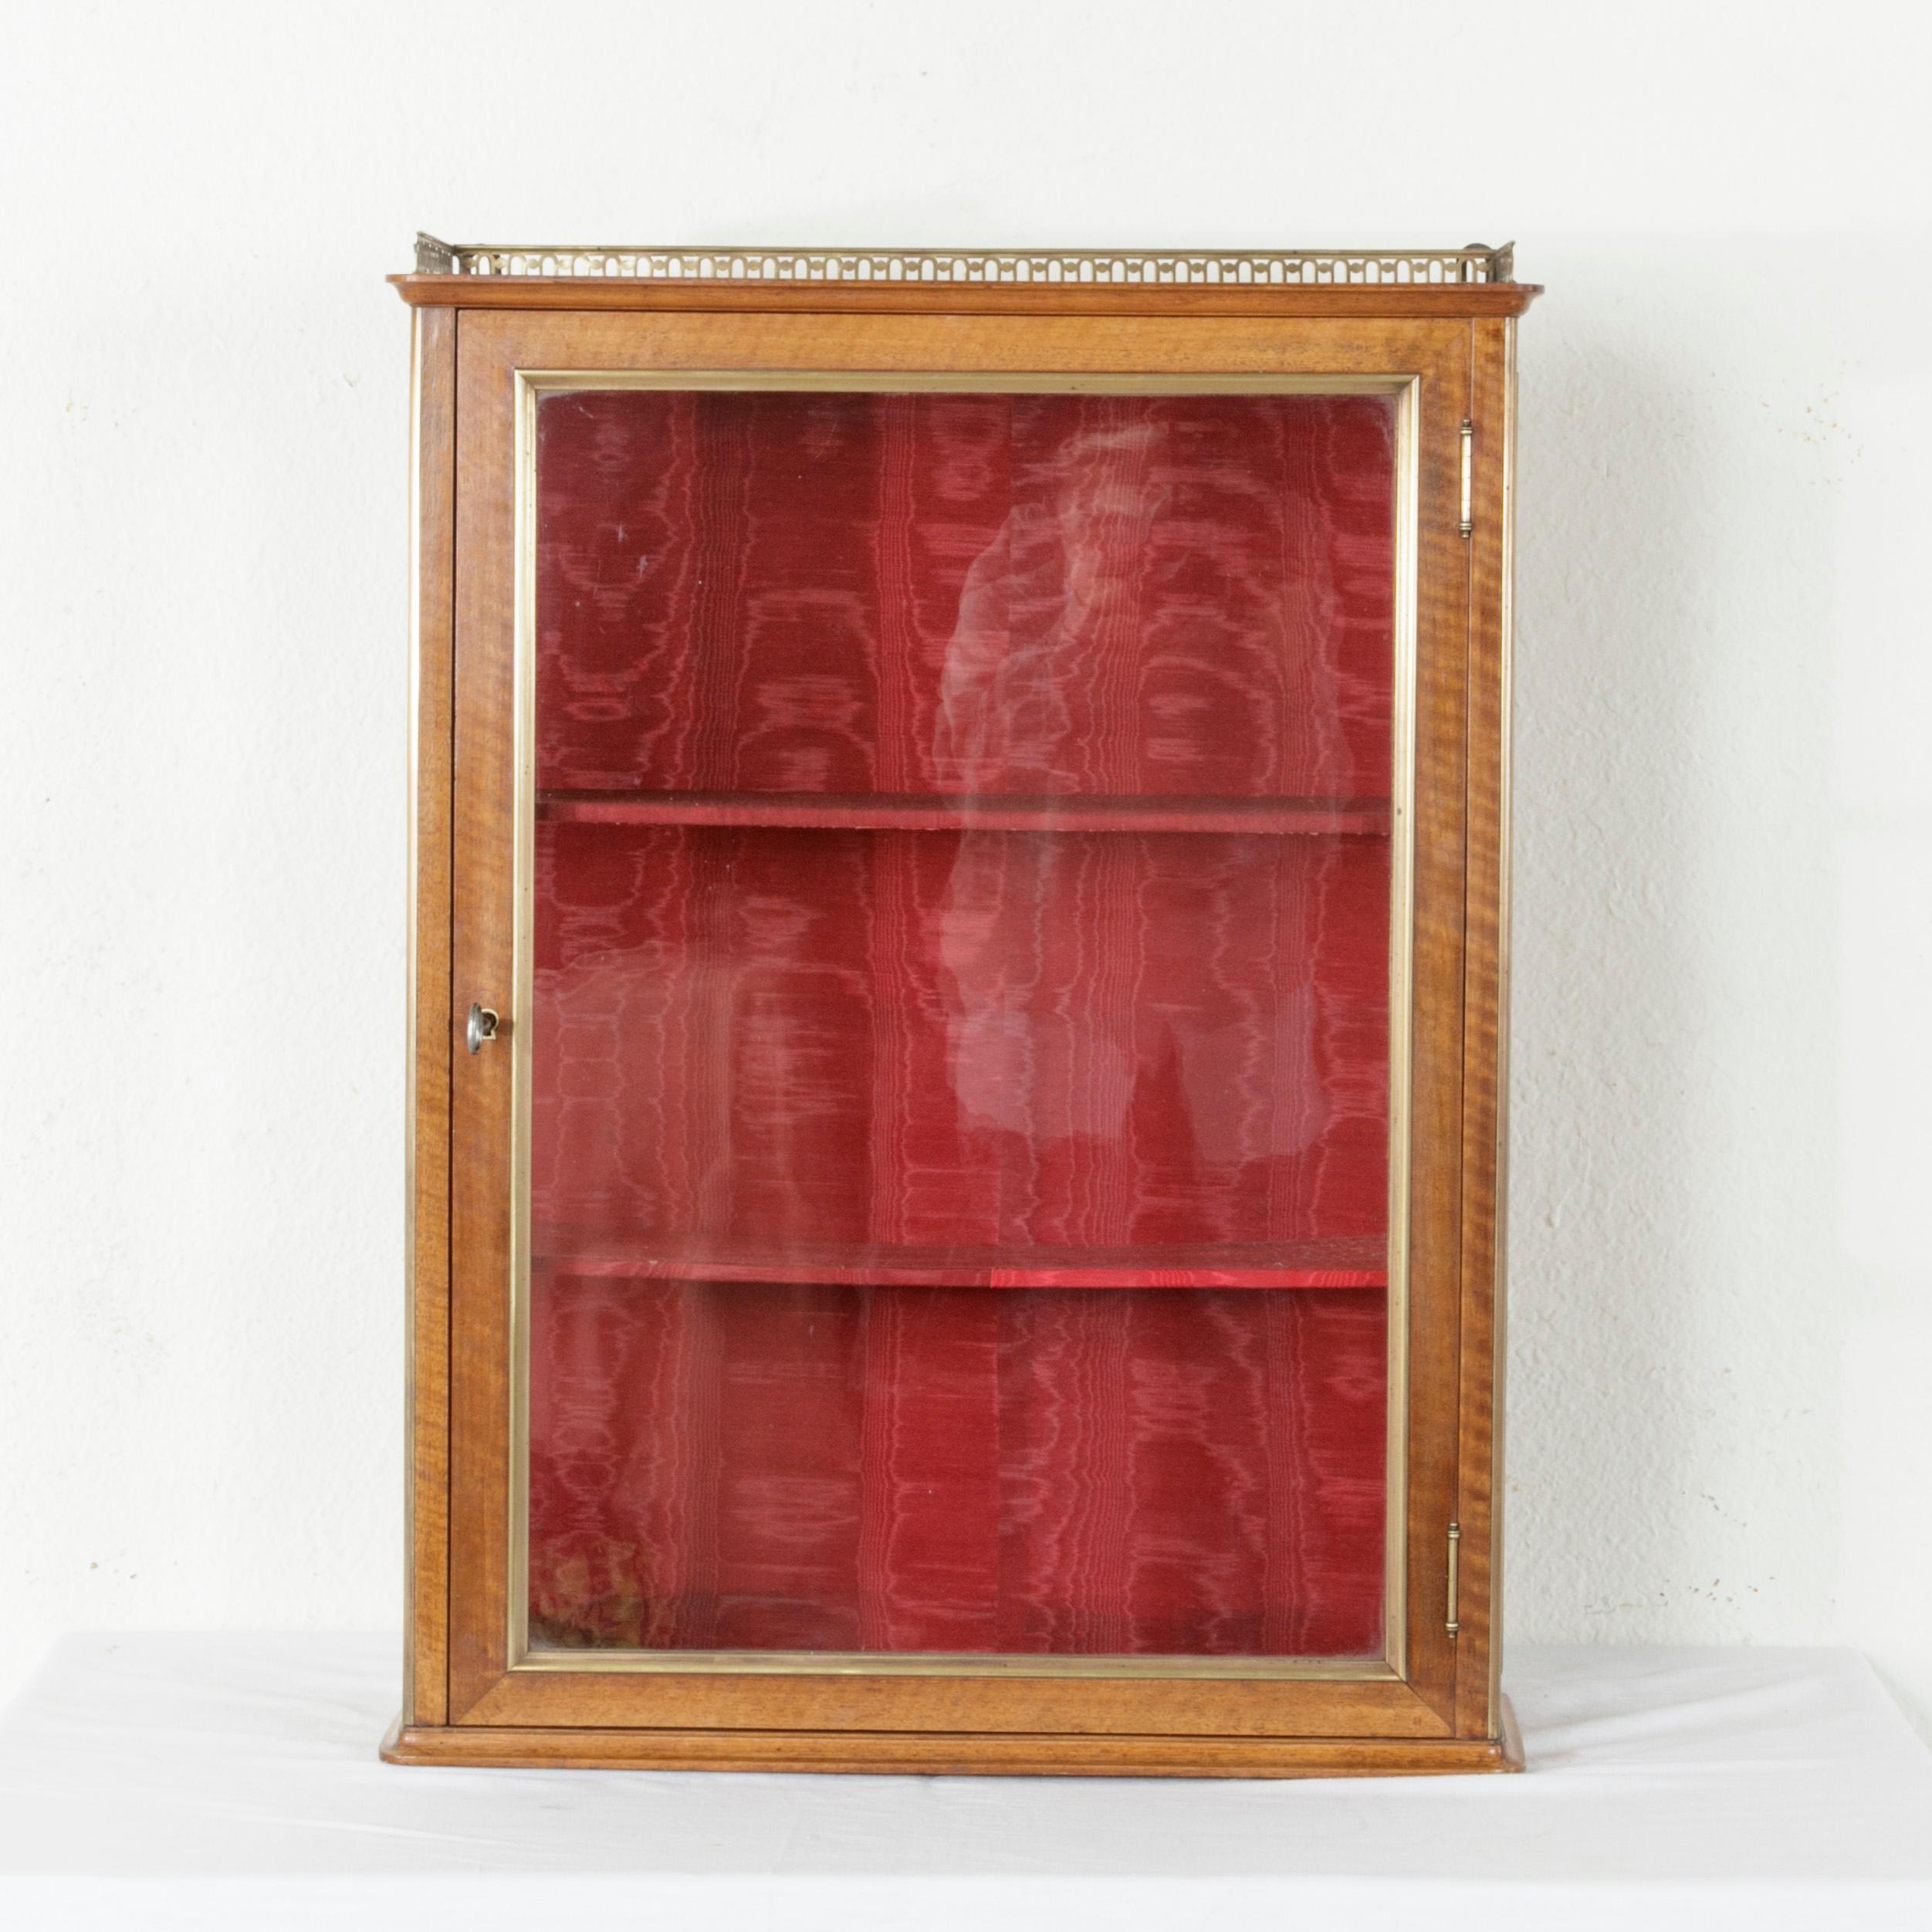 This late 19th century French tabletop walnut vitrine or display cabinet features bronze trim around its hand blown glass door and sides as well as a bronze gallery on the top. The interior is fitted with two shelves and is lined with red moire